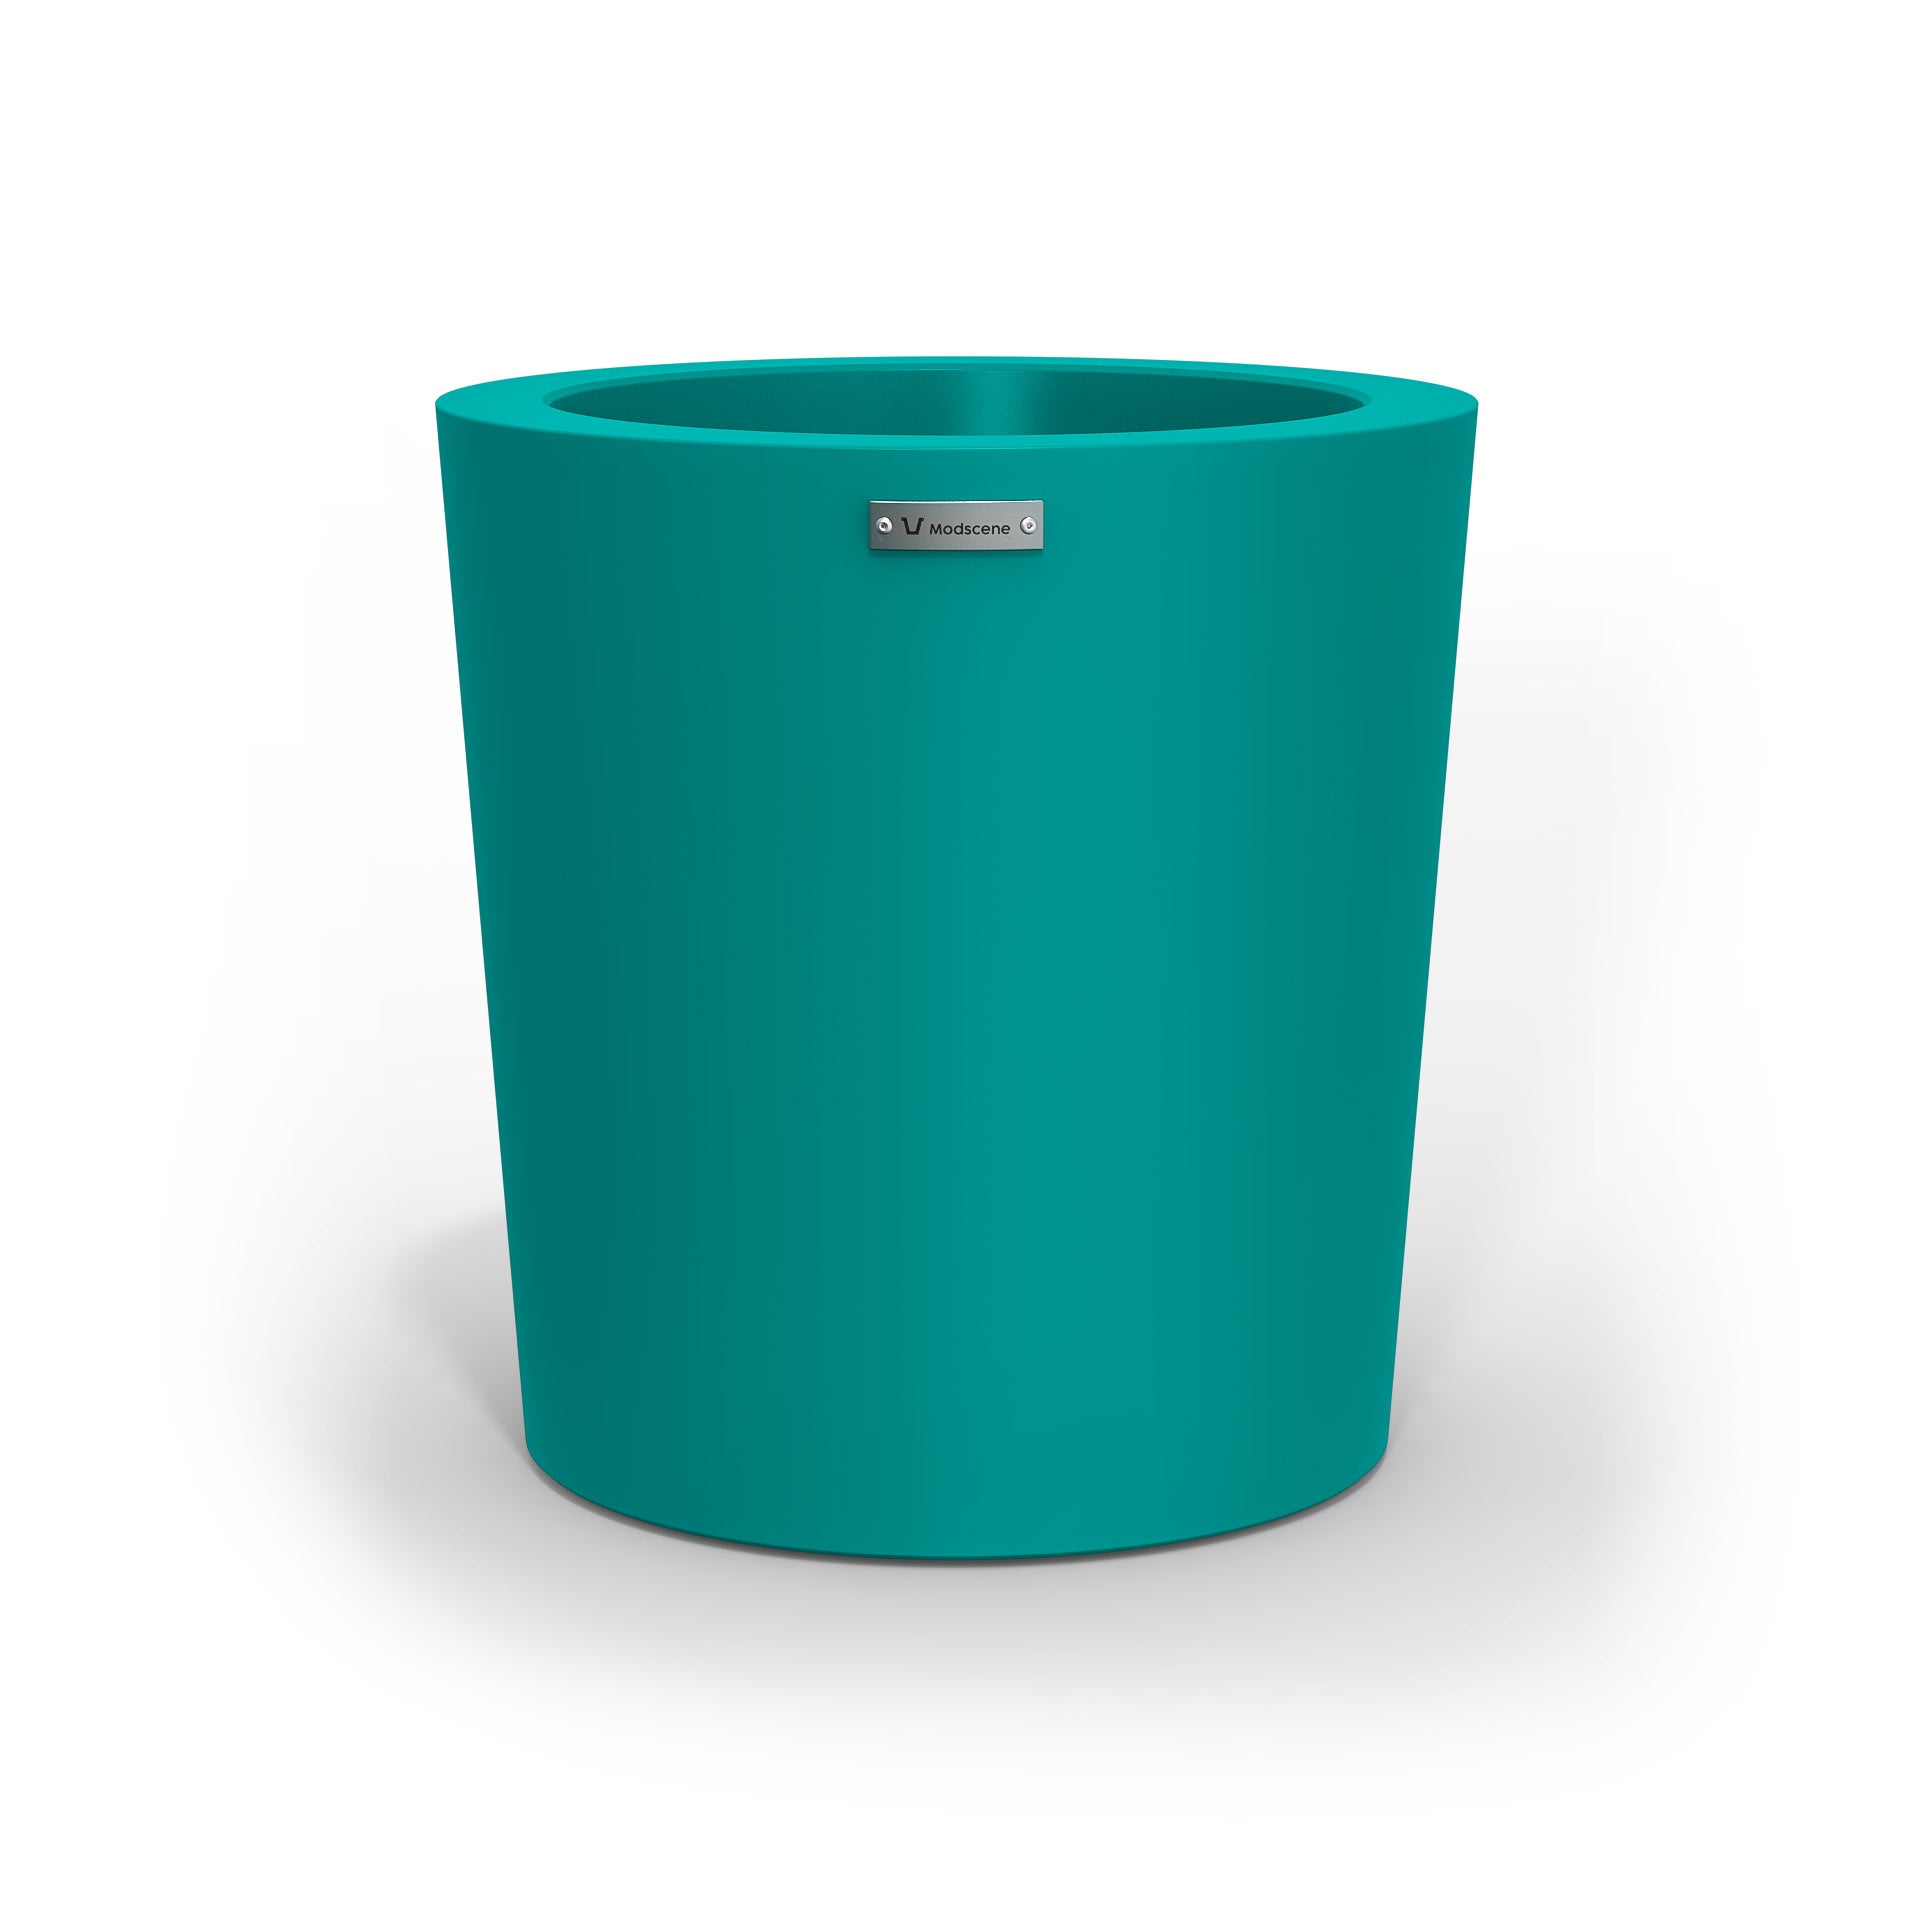 A modern style planter pot in a teal colour. Made by Modscene NZ.